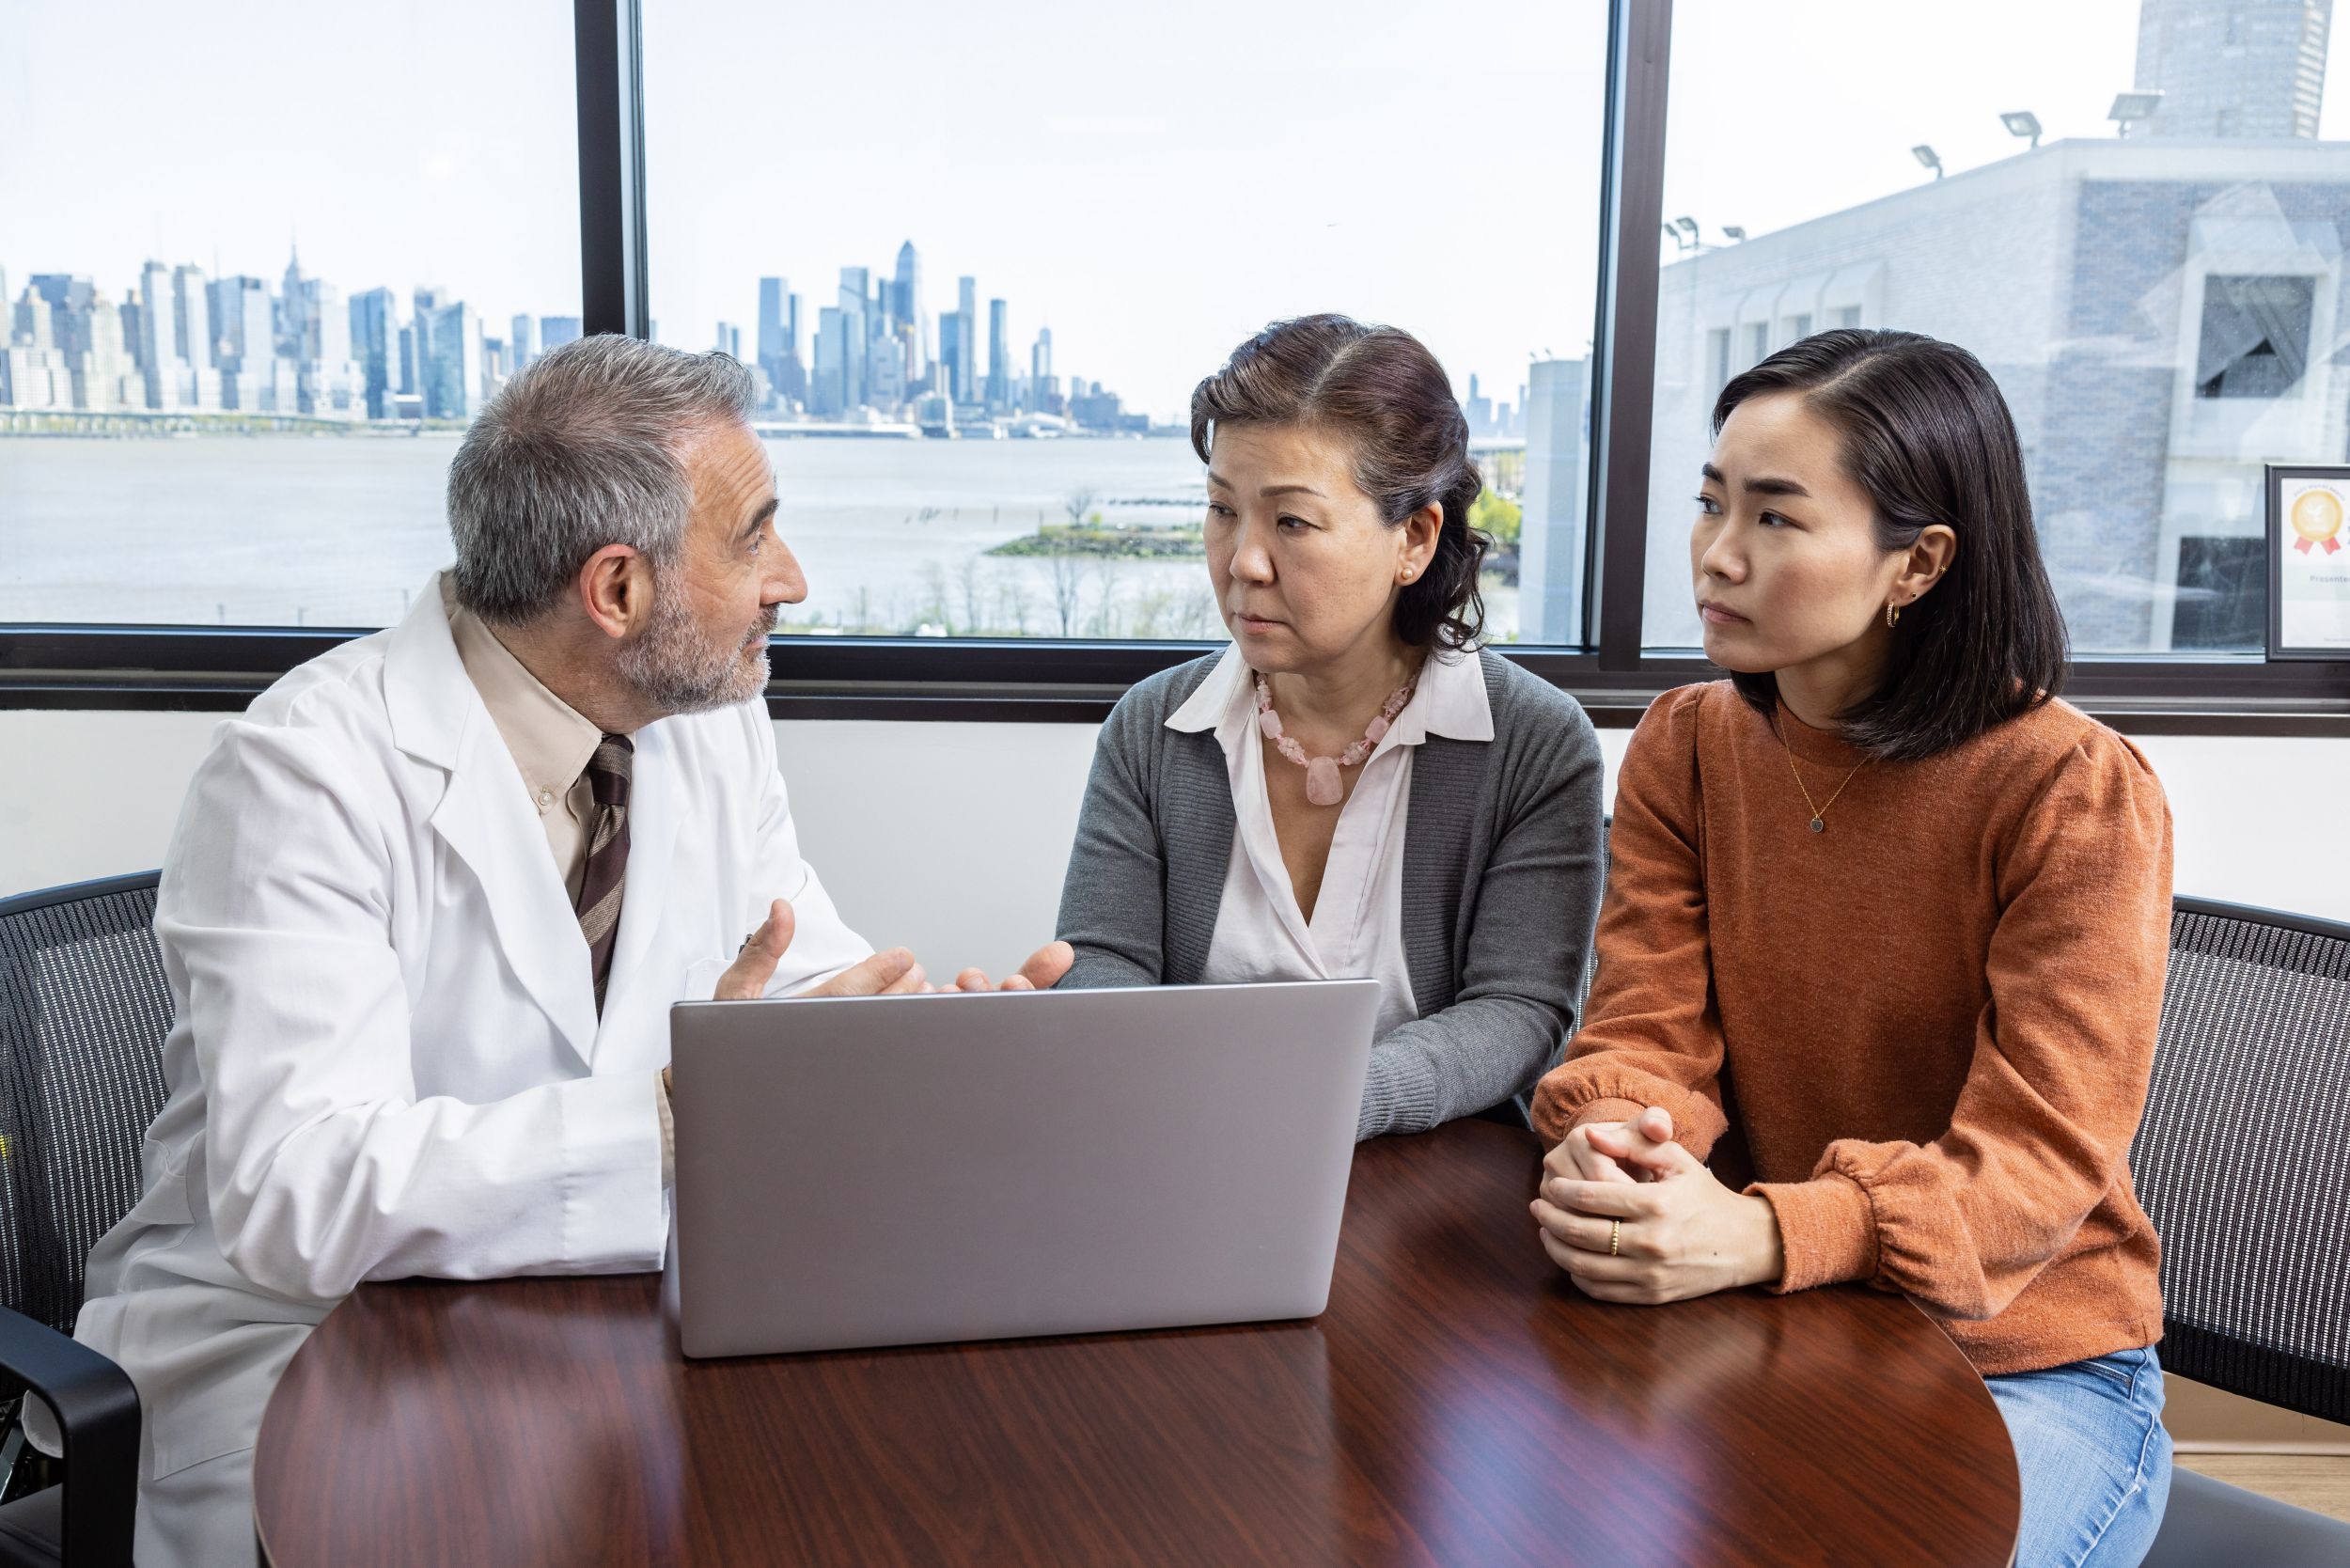 Physician speaking with two women